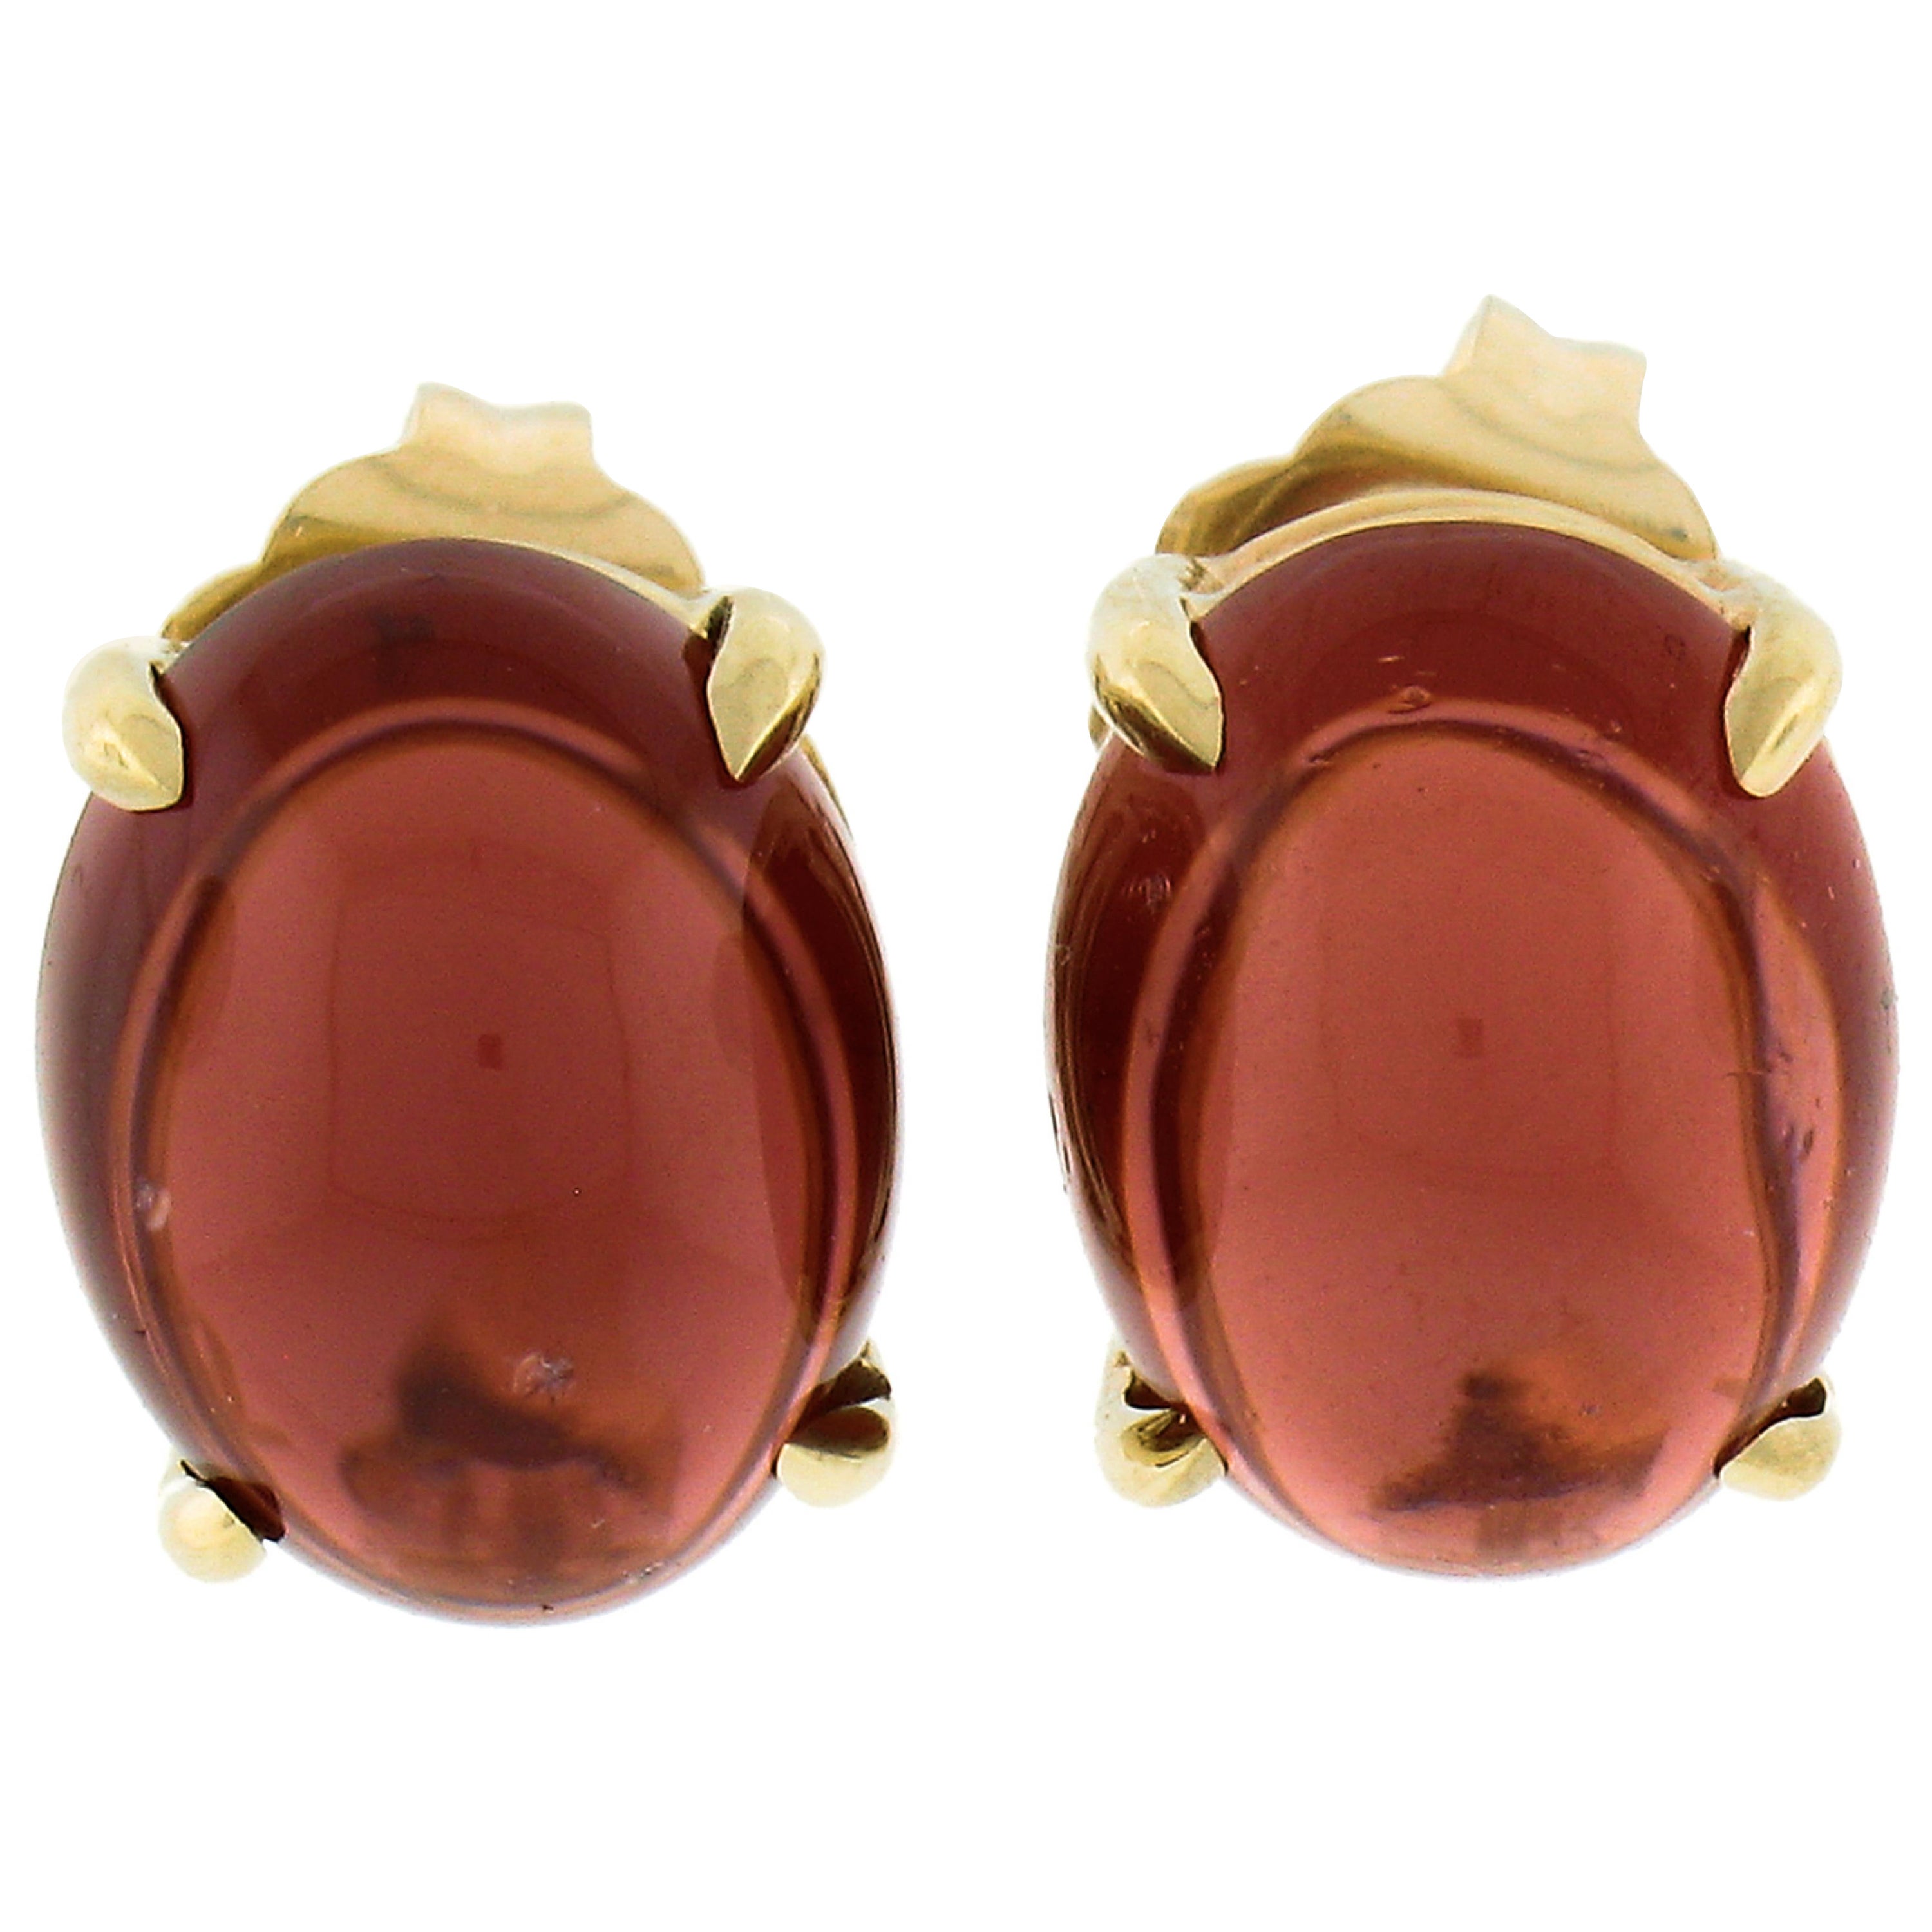 New 14k Yellow Gold 5.57ctw Oval Cabochon Natural Rich Red Garnet Stud Earrings For Sale